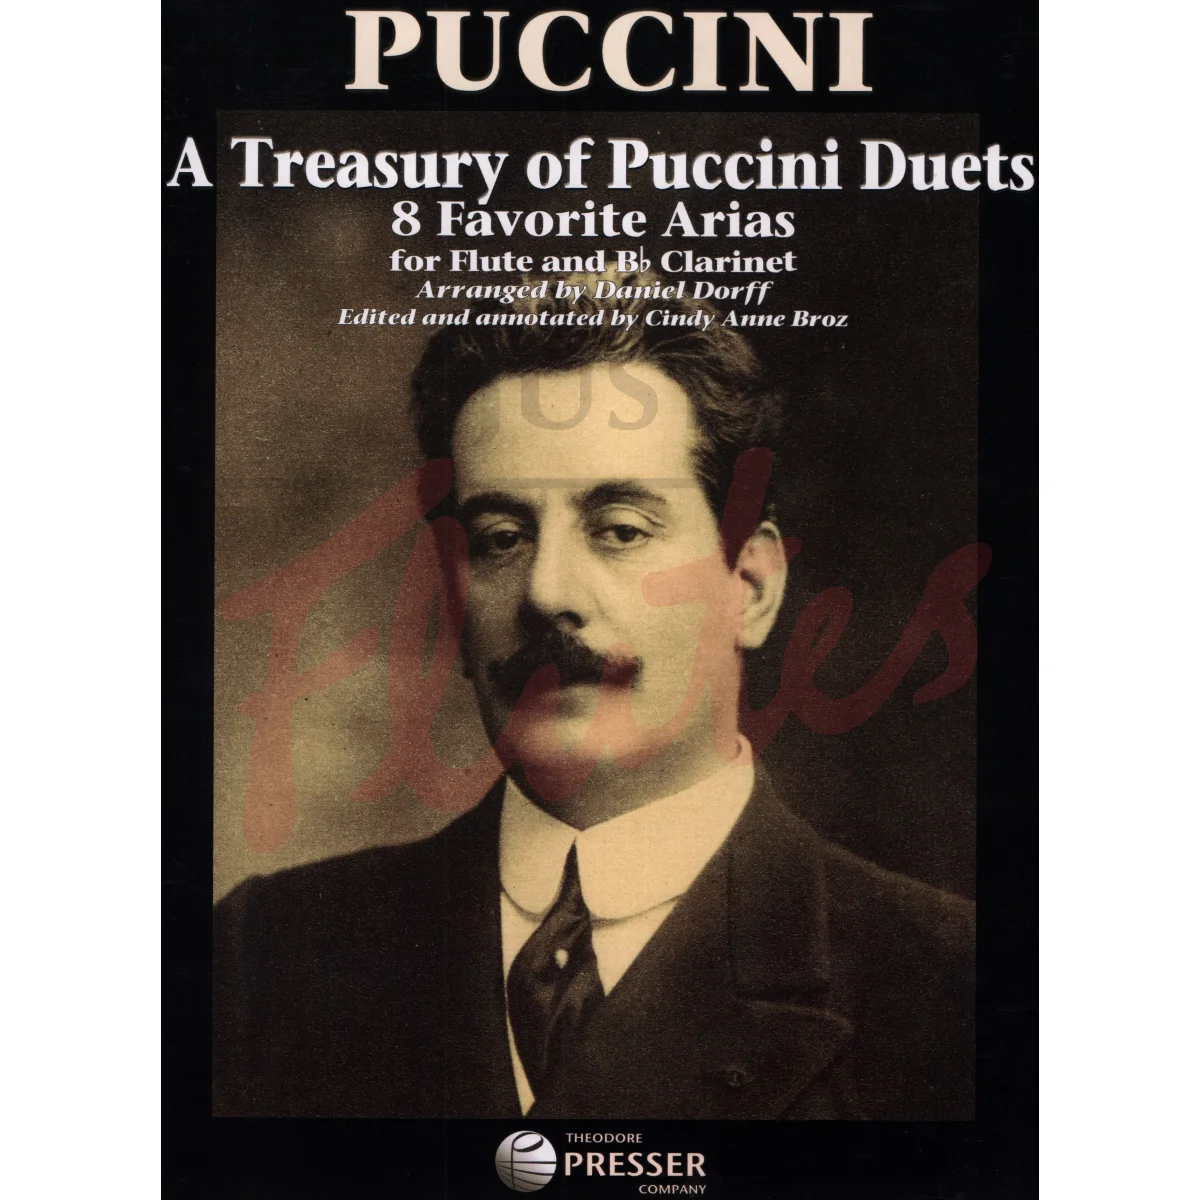 A Treasury of Puccini Duets - 8 Favourite Arias for Flute and Clarinet